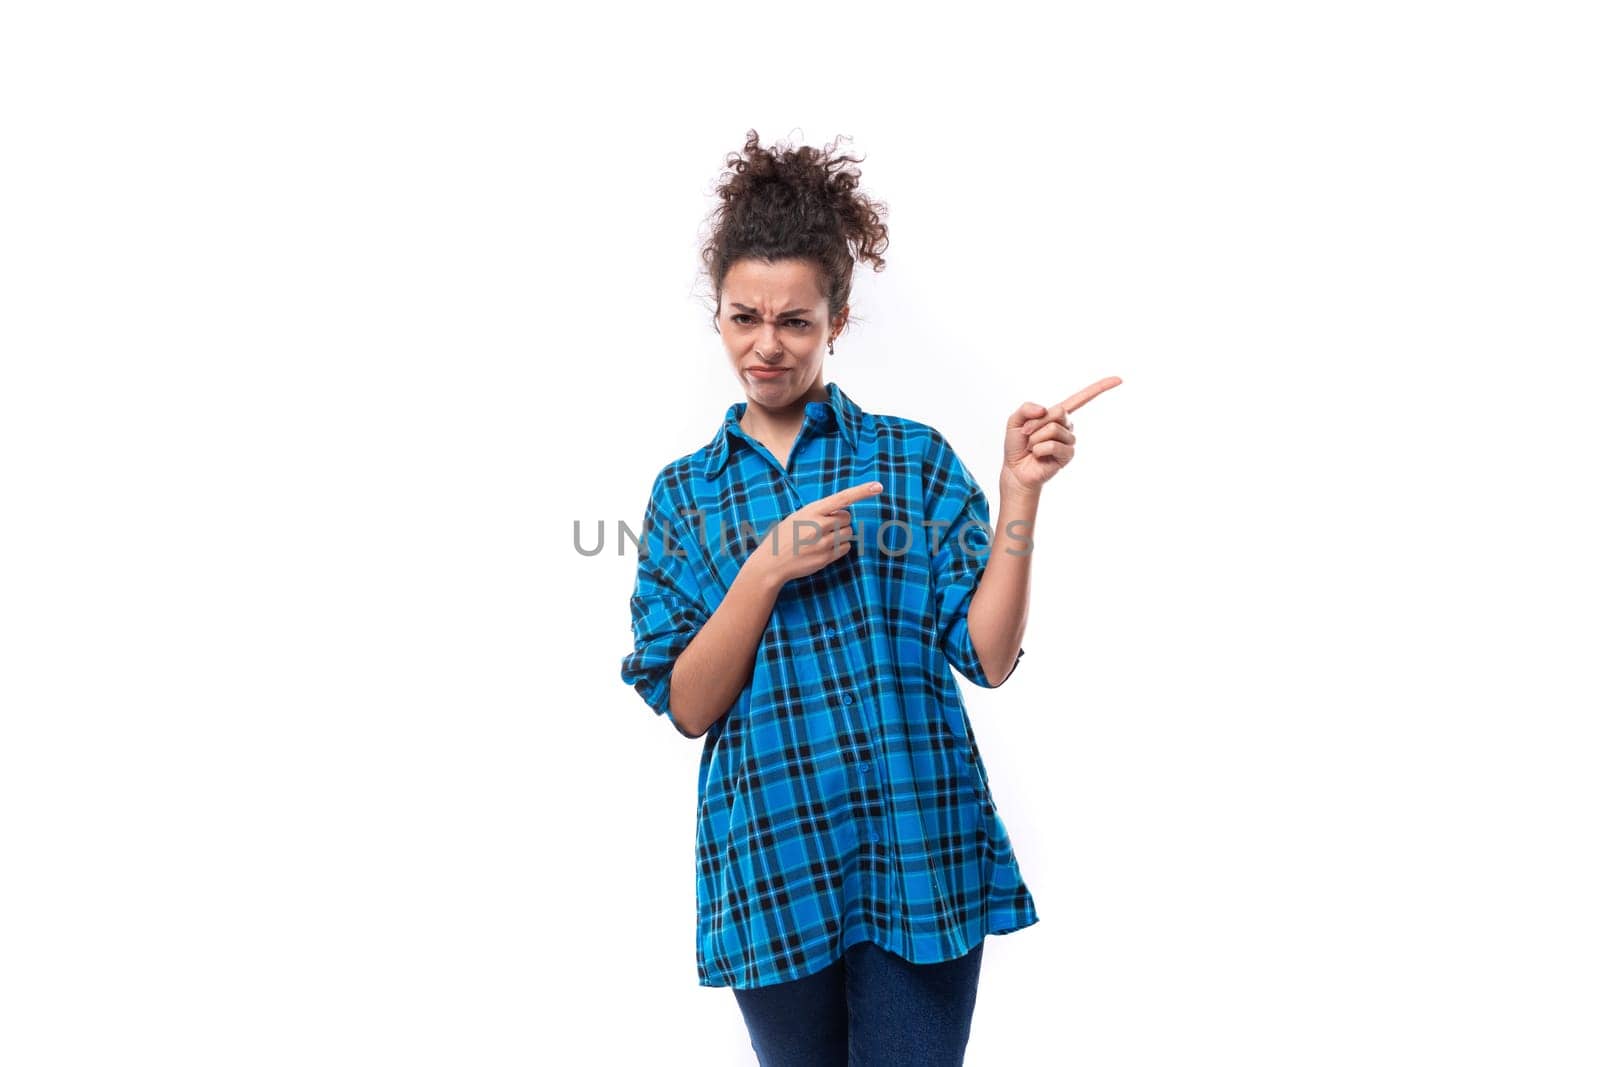 young dark haired european woman dressed informally in a blue plaid shirt points with her hand to the side isolated on white background by TRMK